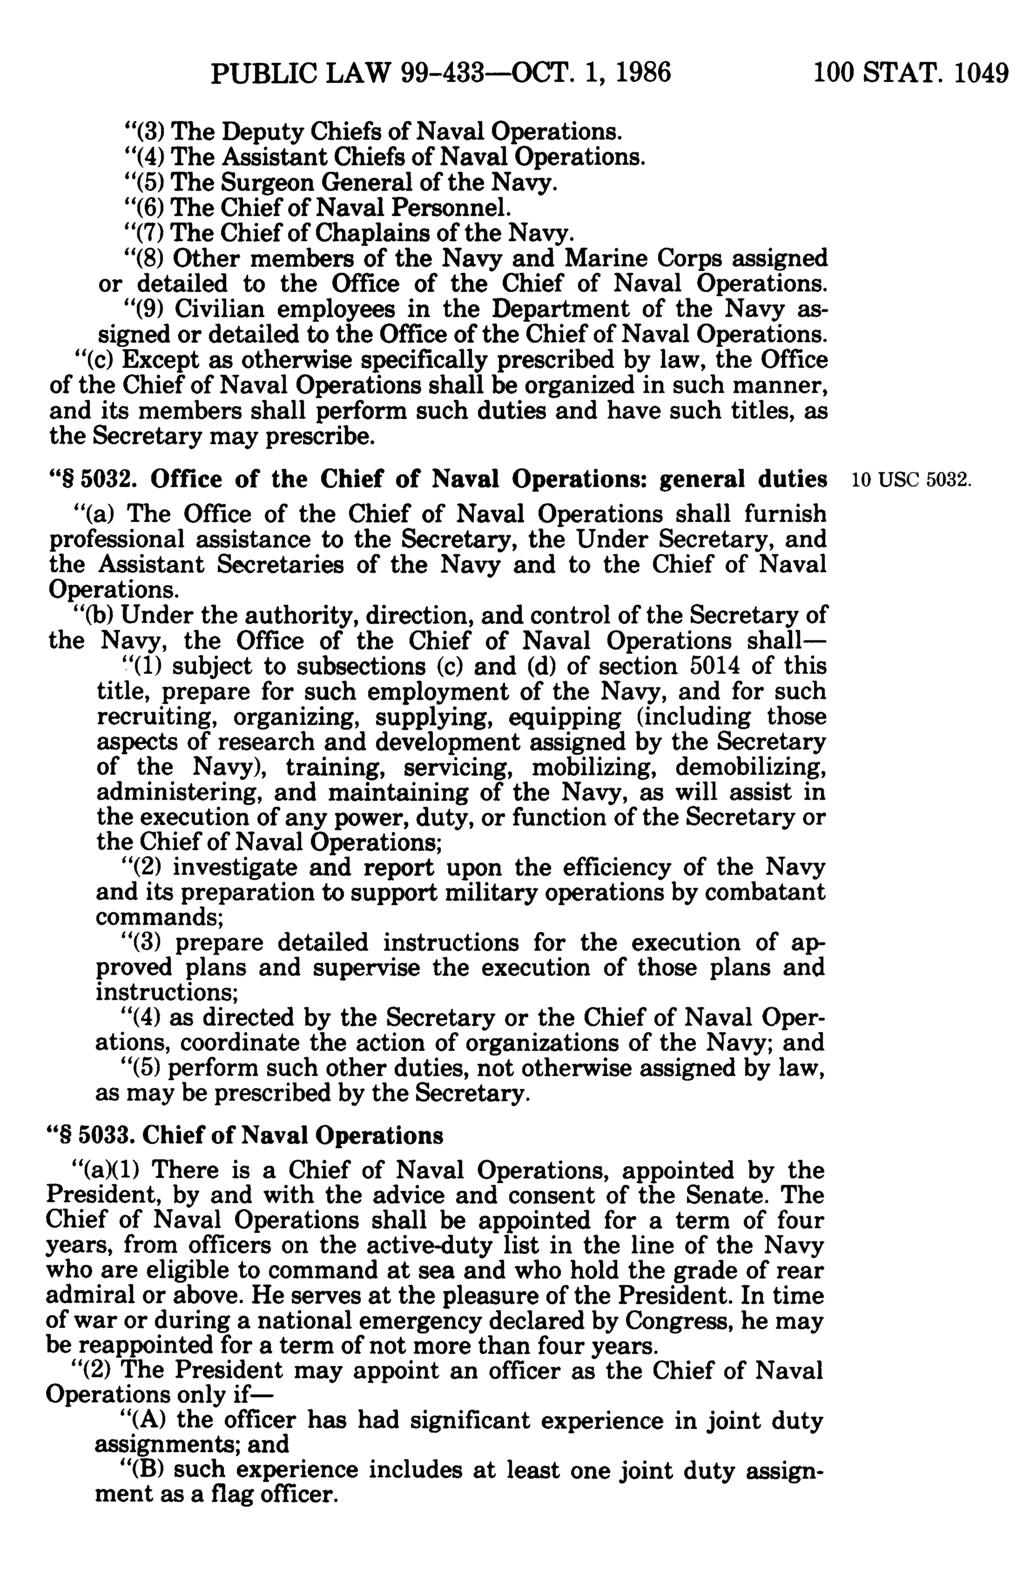 PUBLIC LAW 99-433-OCT. 1, 1986 100 STAT. 1049 (3) The Deputy Chiefs of Naval Operations. (4) The Assistant Chiefs of Naval Operations. (5) The Surgeon General of the Navy.